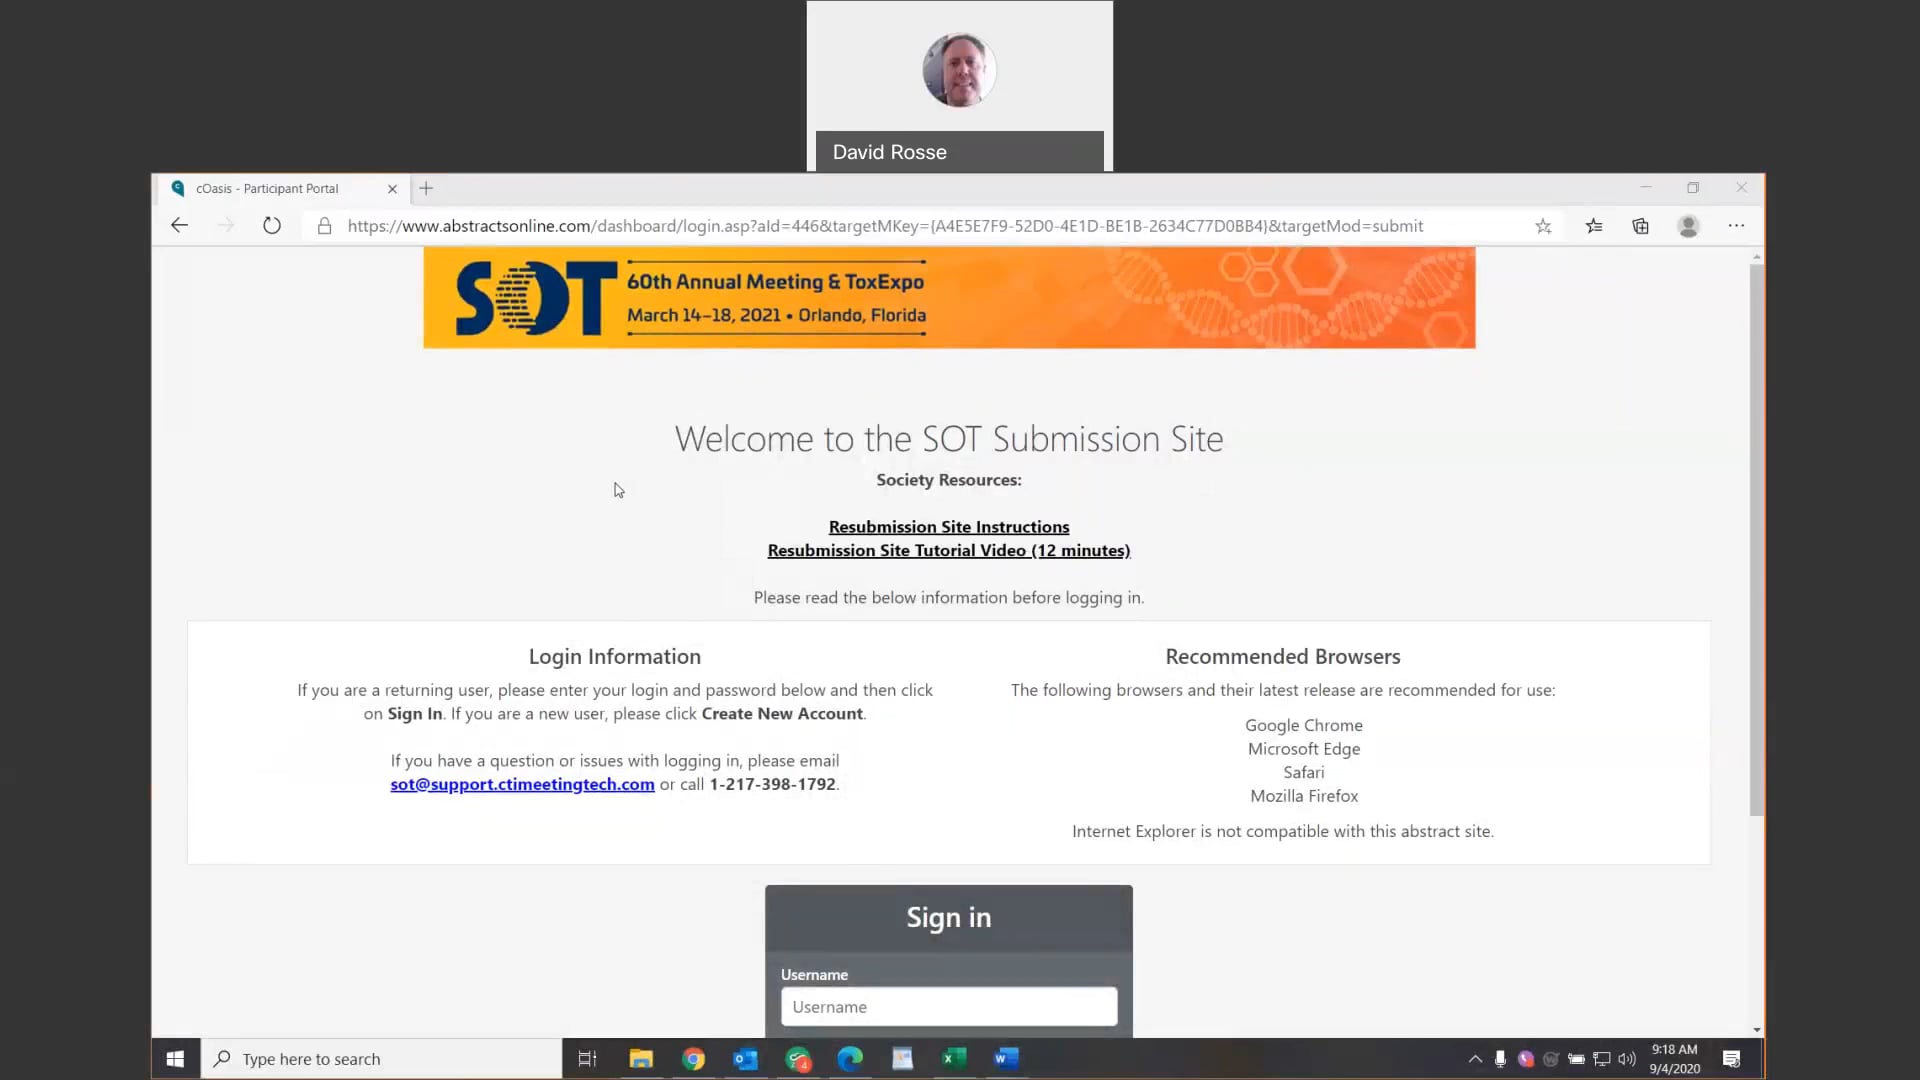 2021 SOT Abstract Submission Abstract Video Instructions on Vimeo